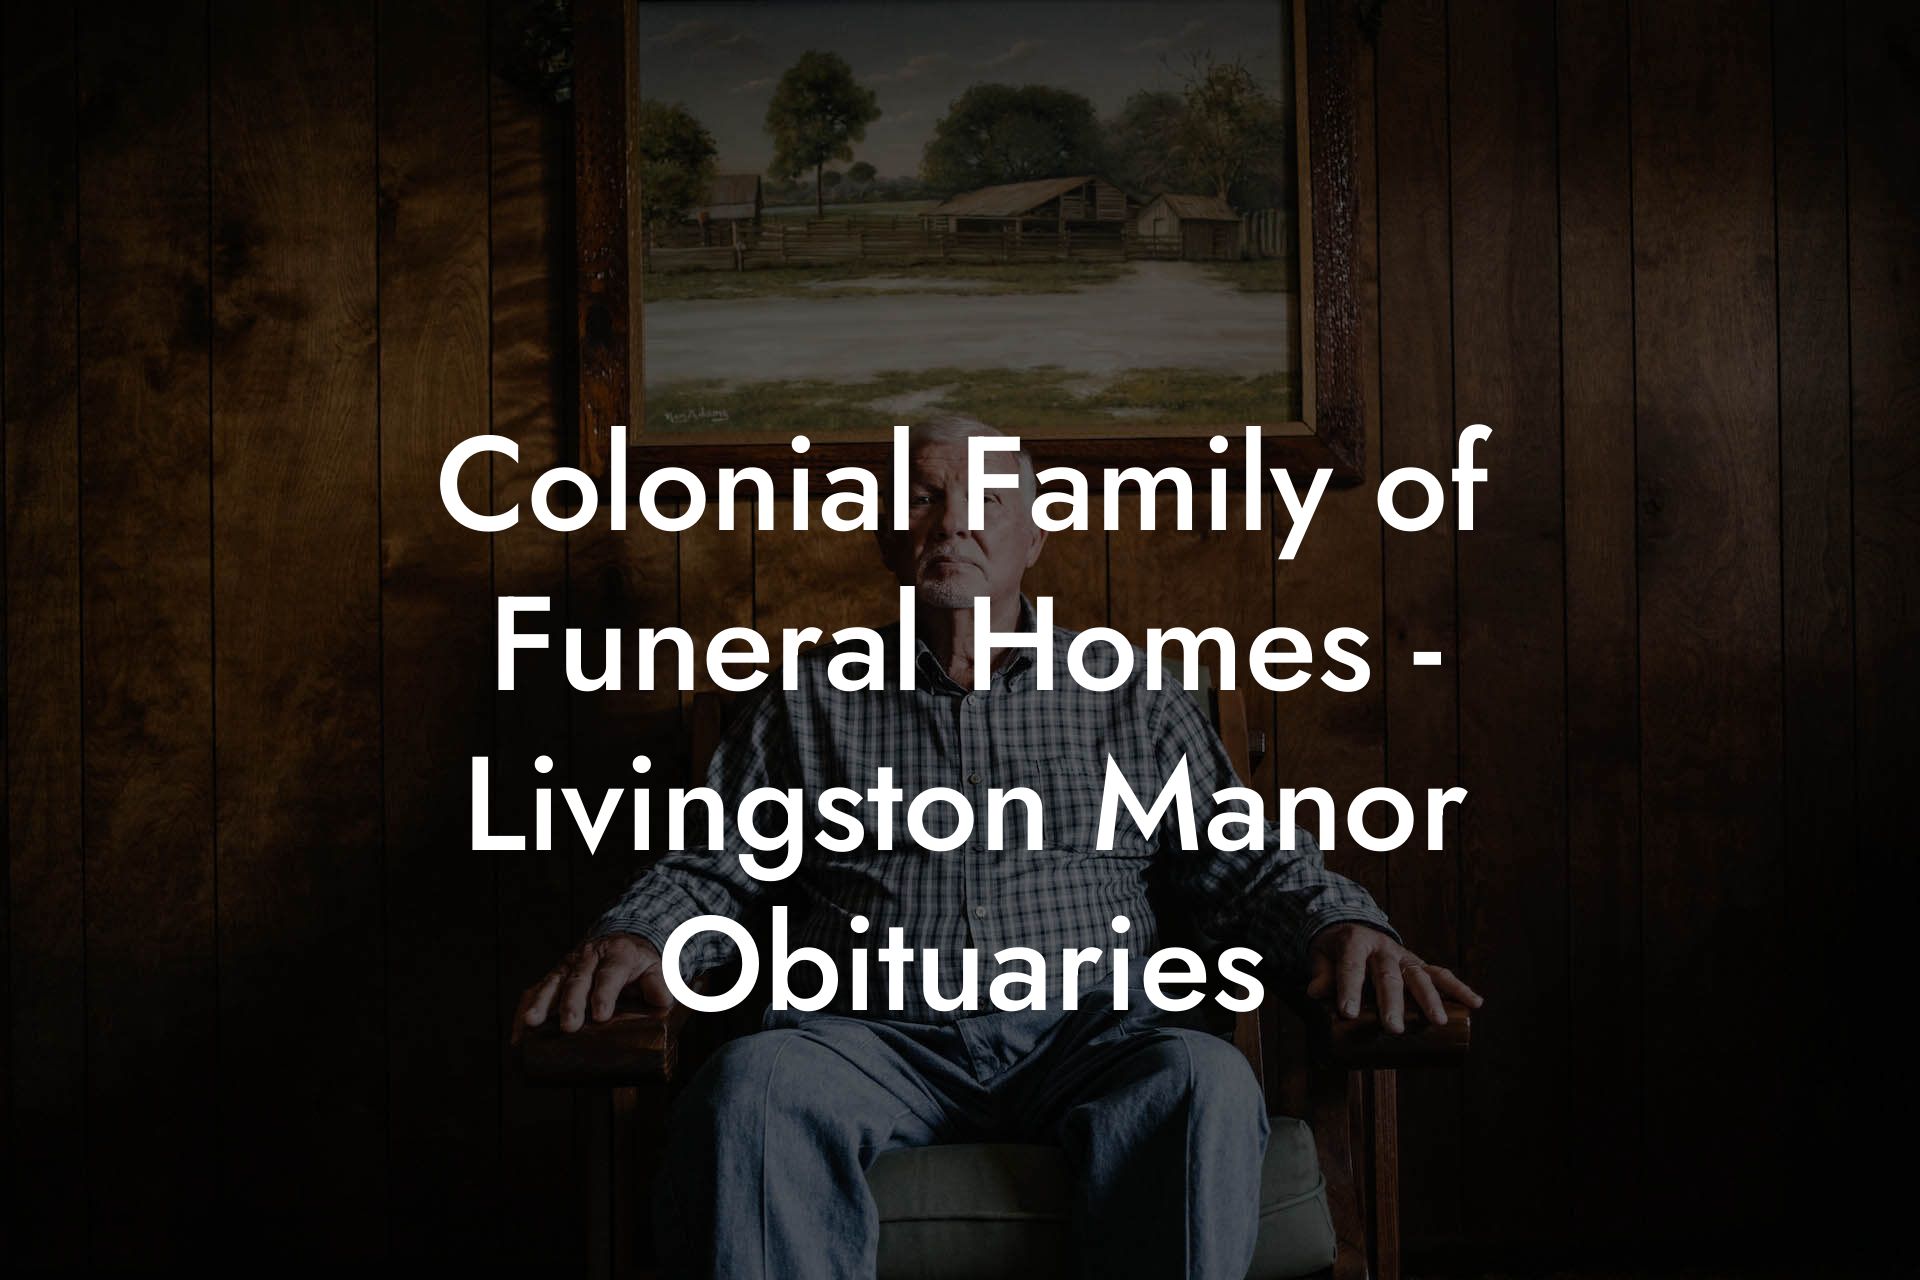 Colonial Family of Funeral Homes - Livingston Manor Obituaries